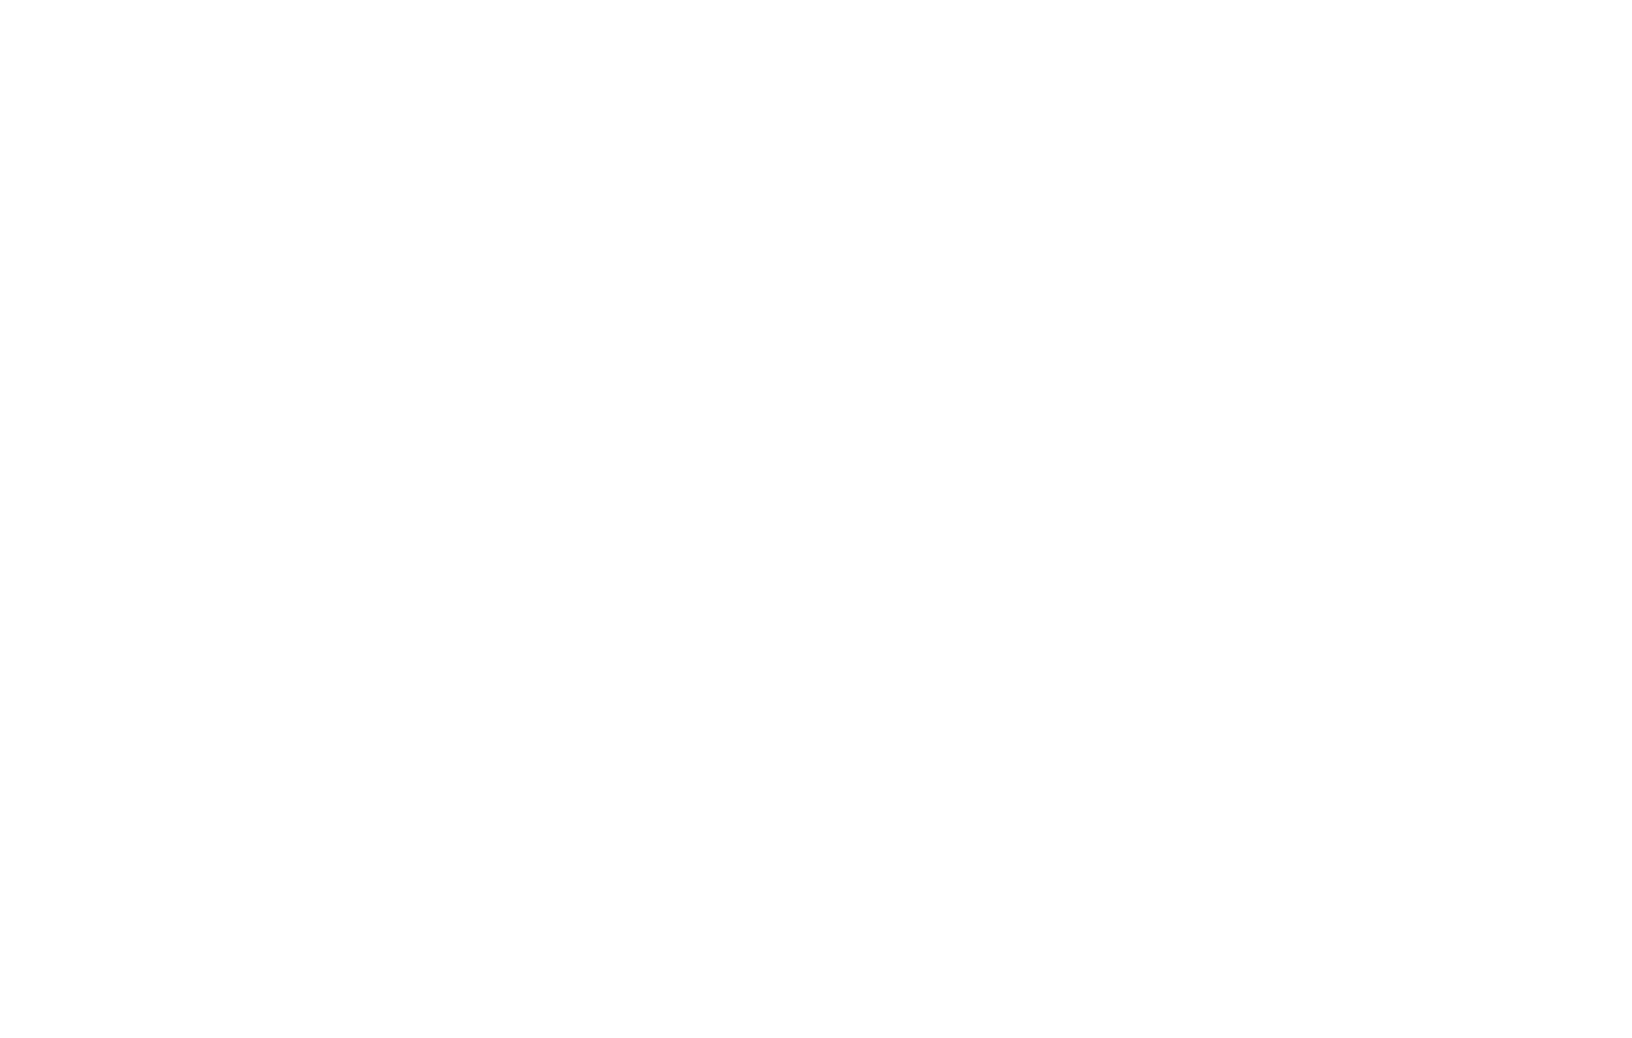 line drawing of small ceramic ancient Egyptian hippo figurine